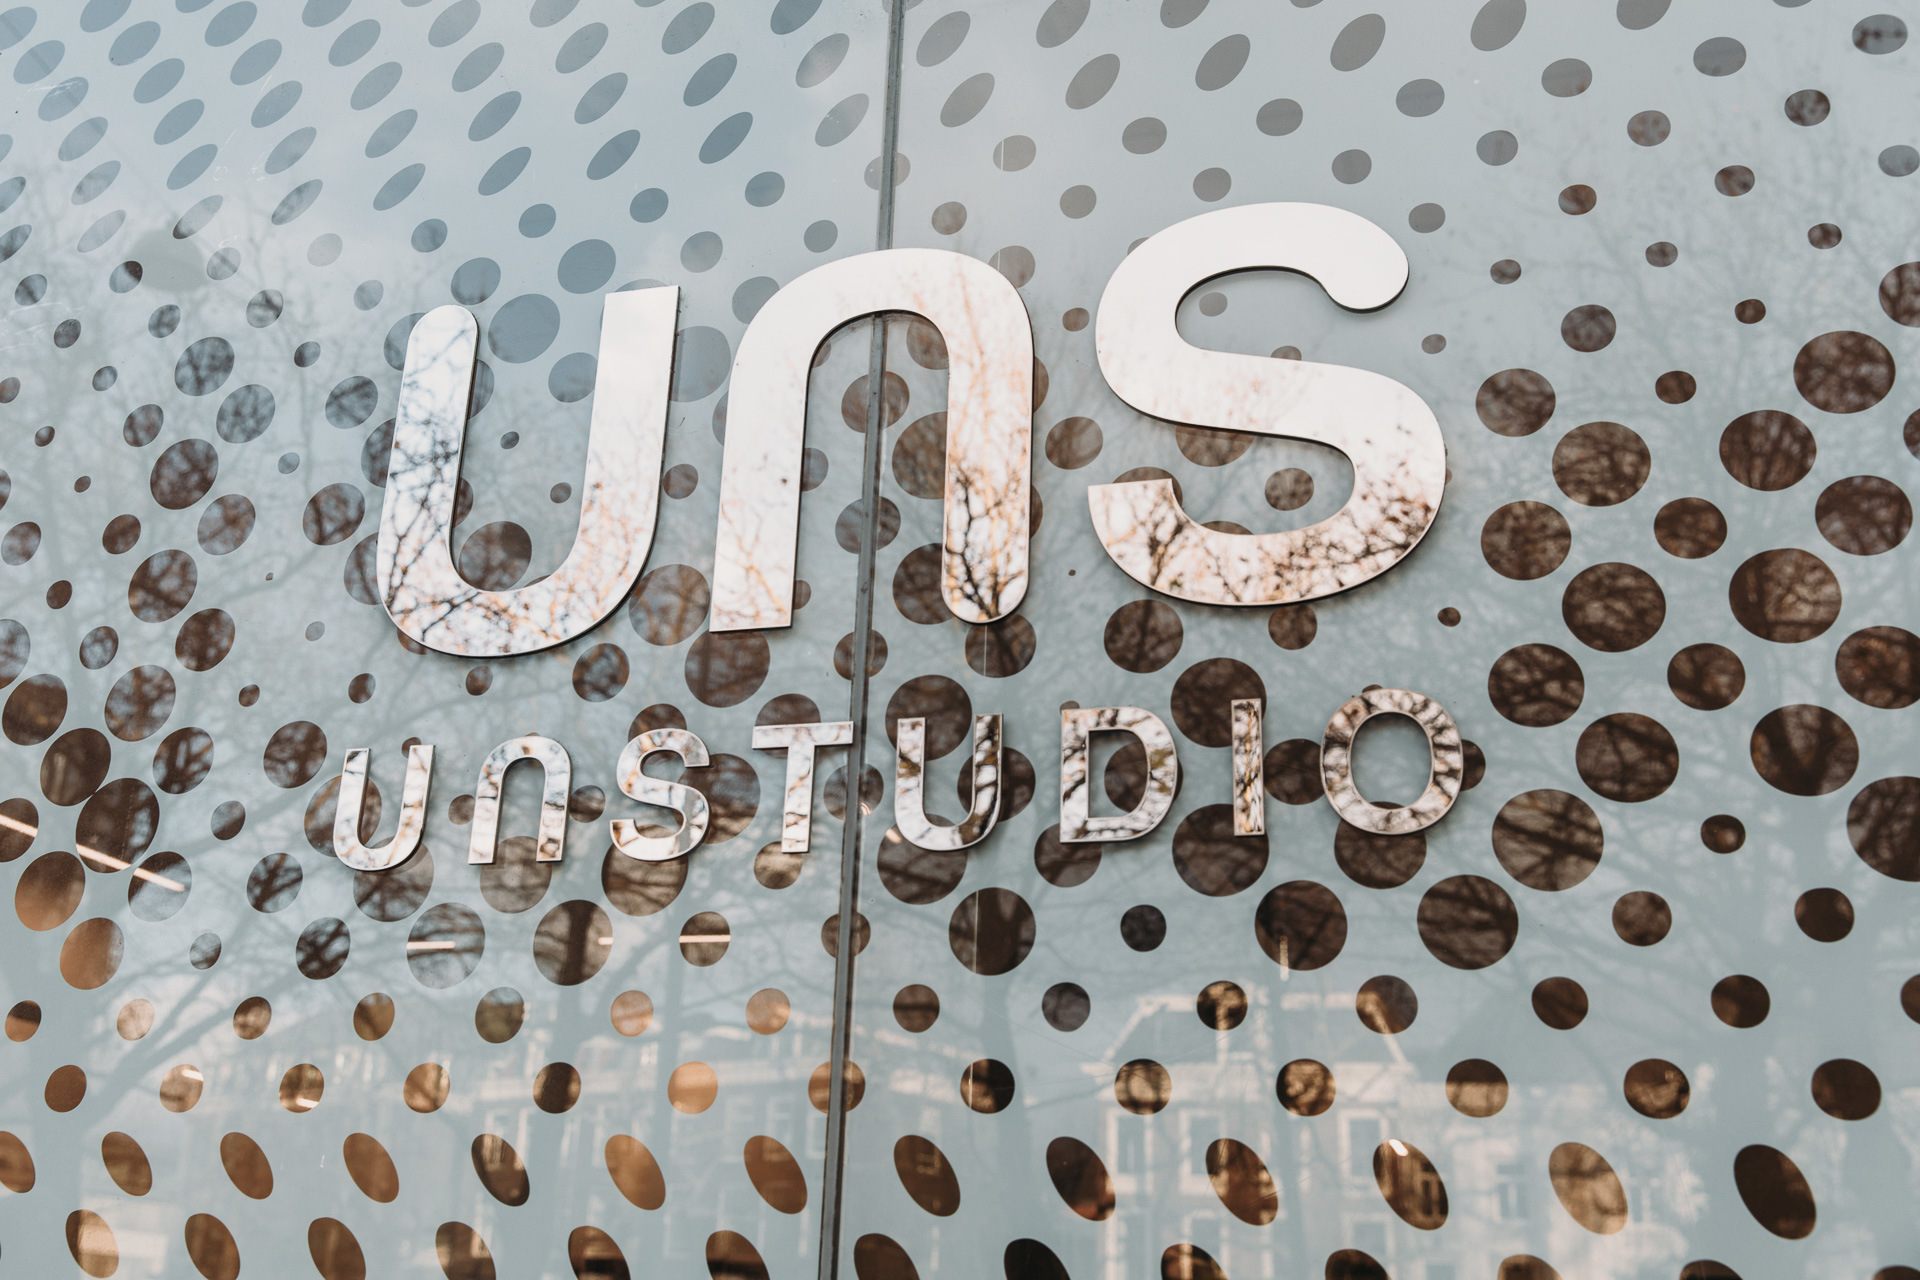 PRESS RELEASE | UNStudio expands its leadership team and local presence across the globe